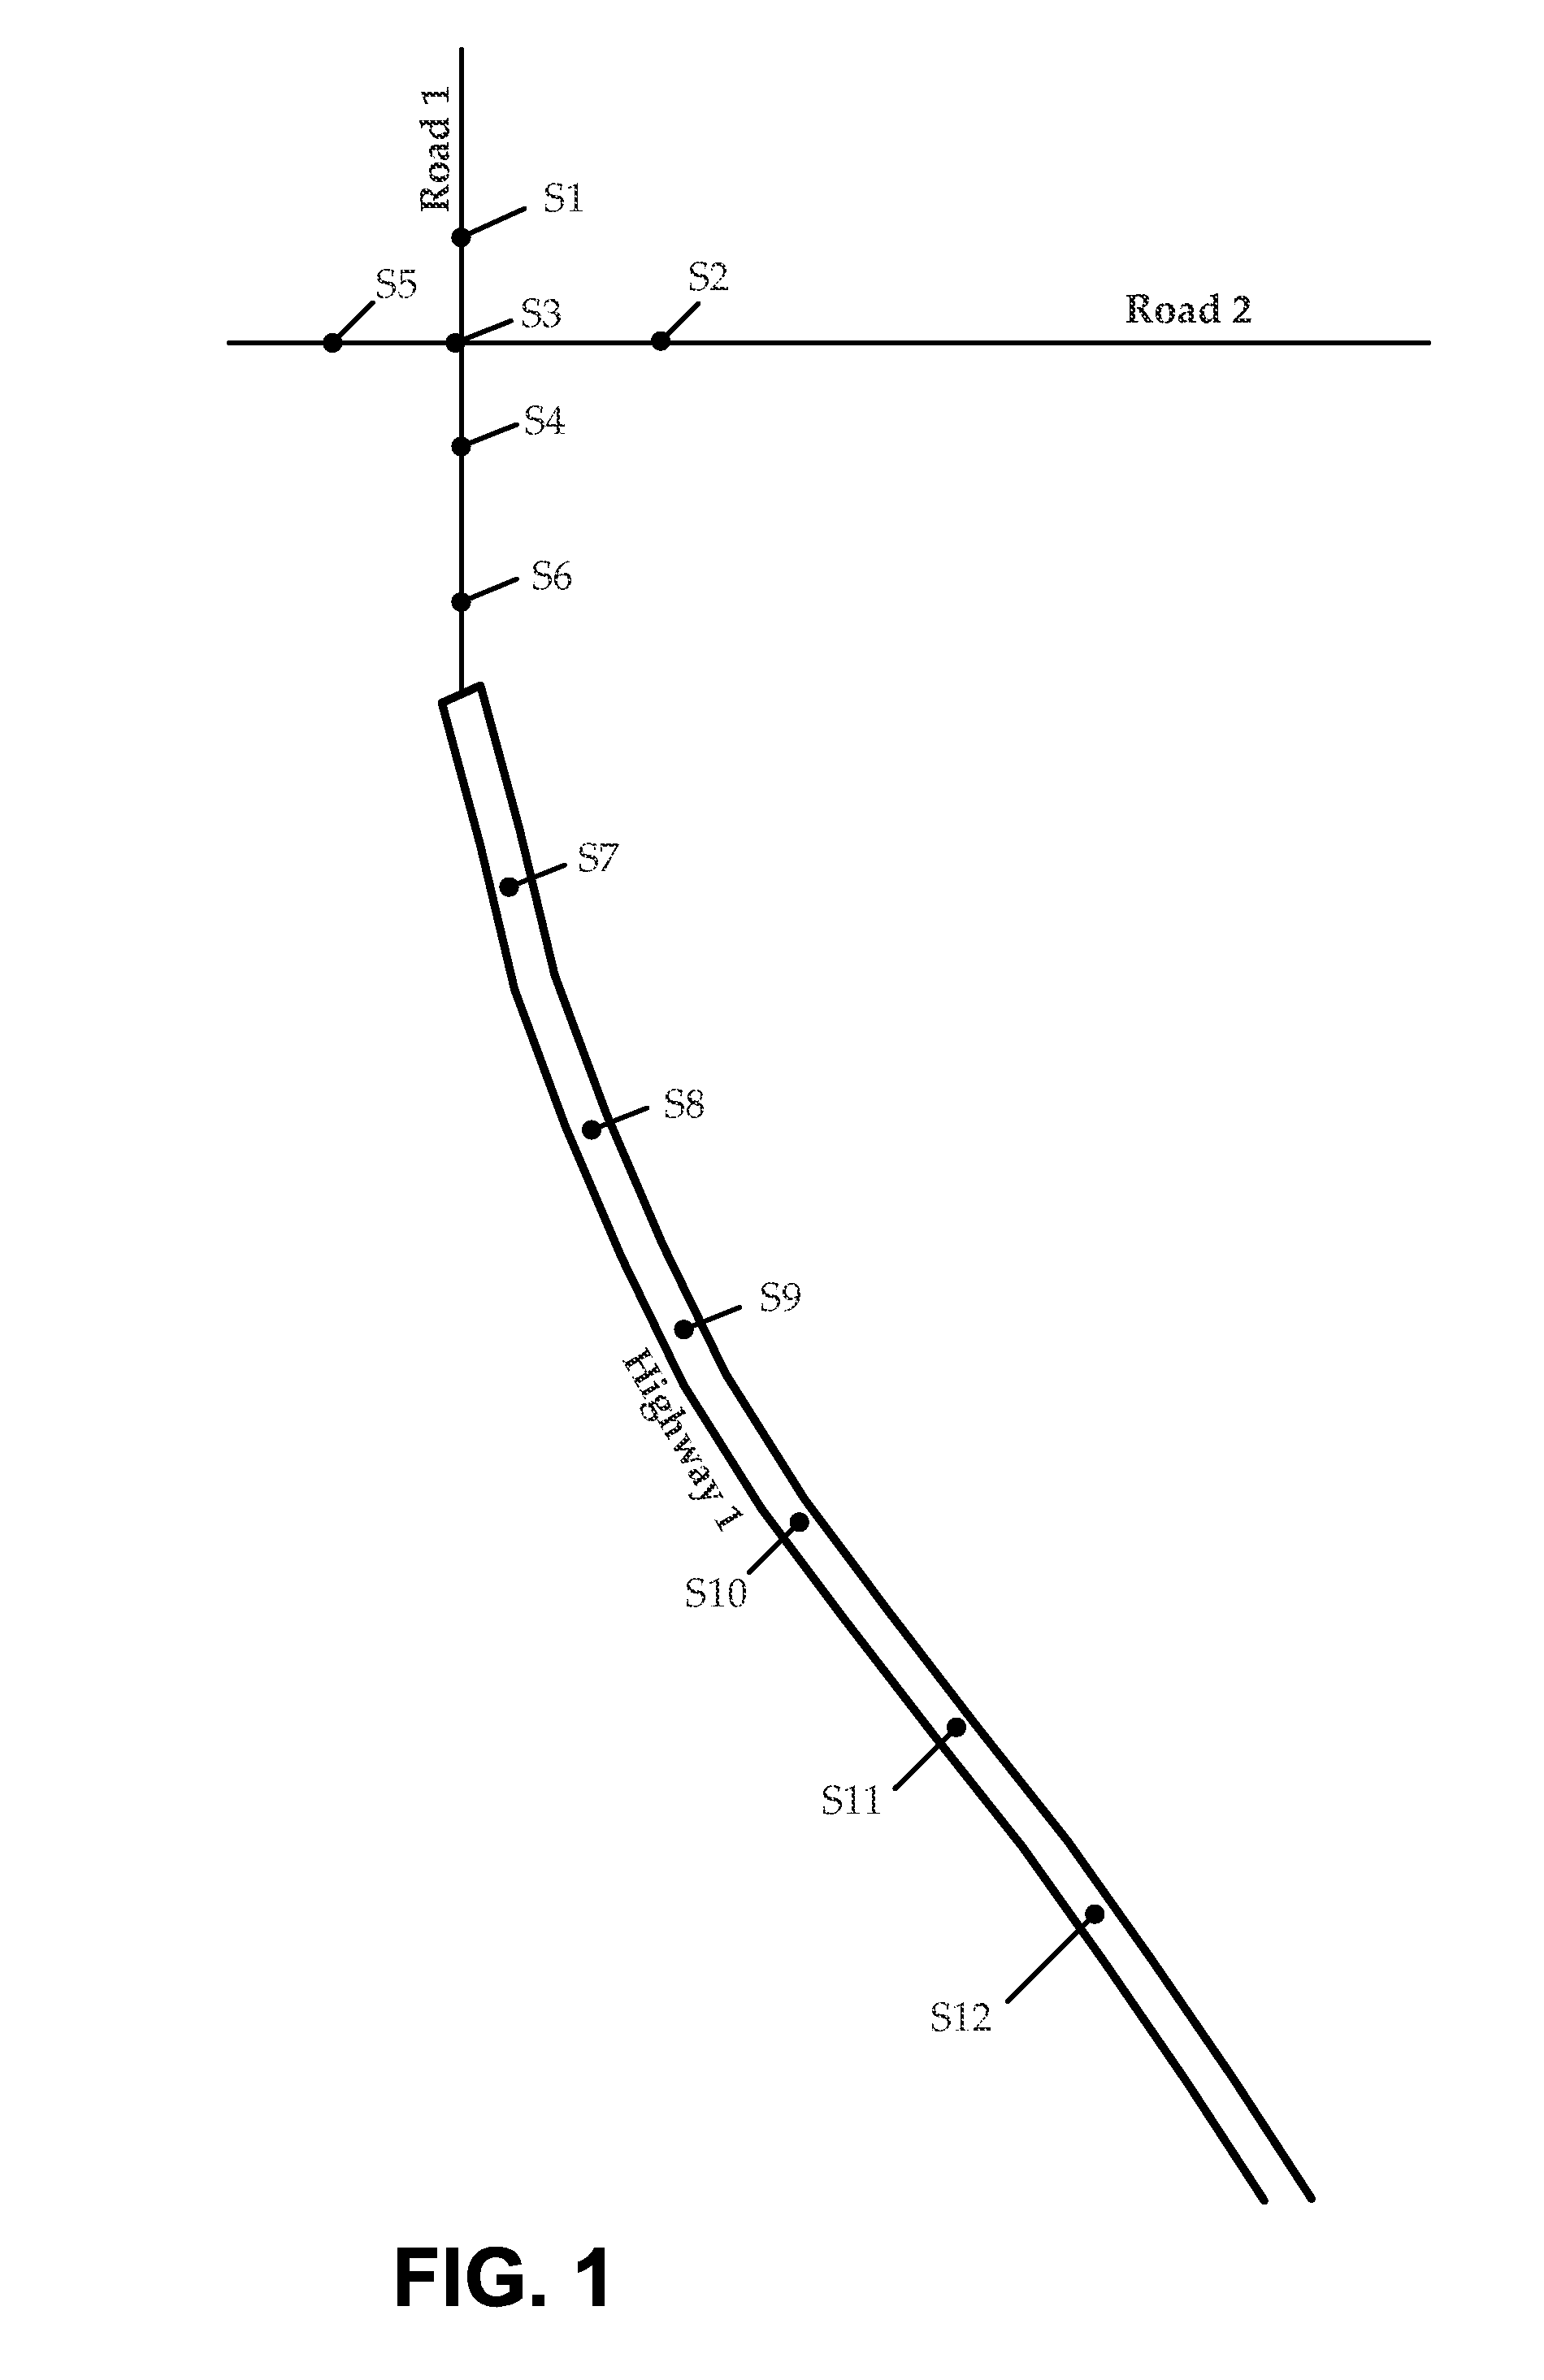 Traffic analysis system using wireless networking devices